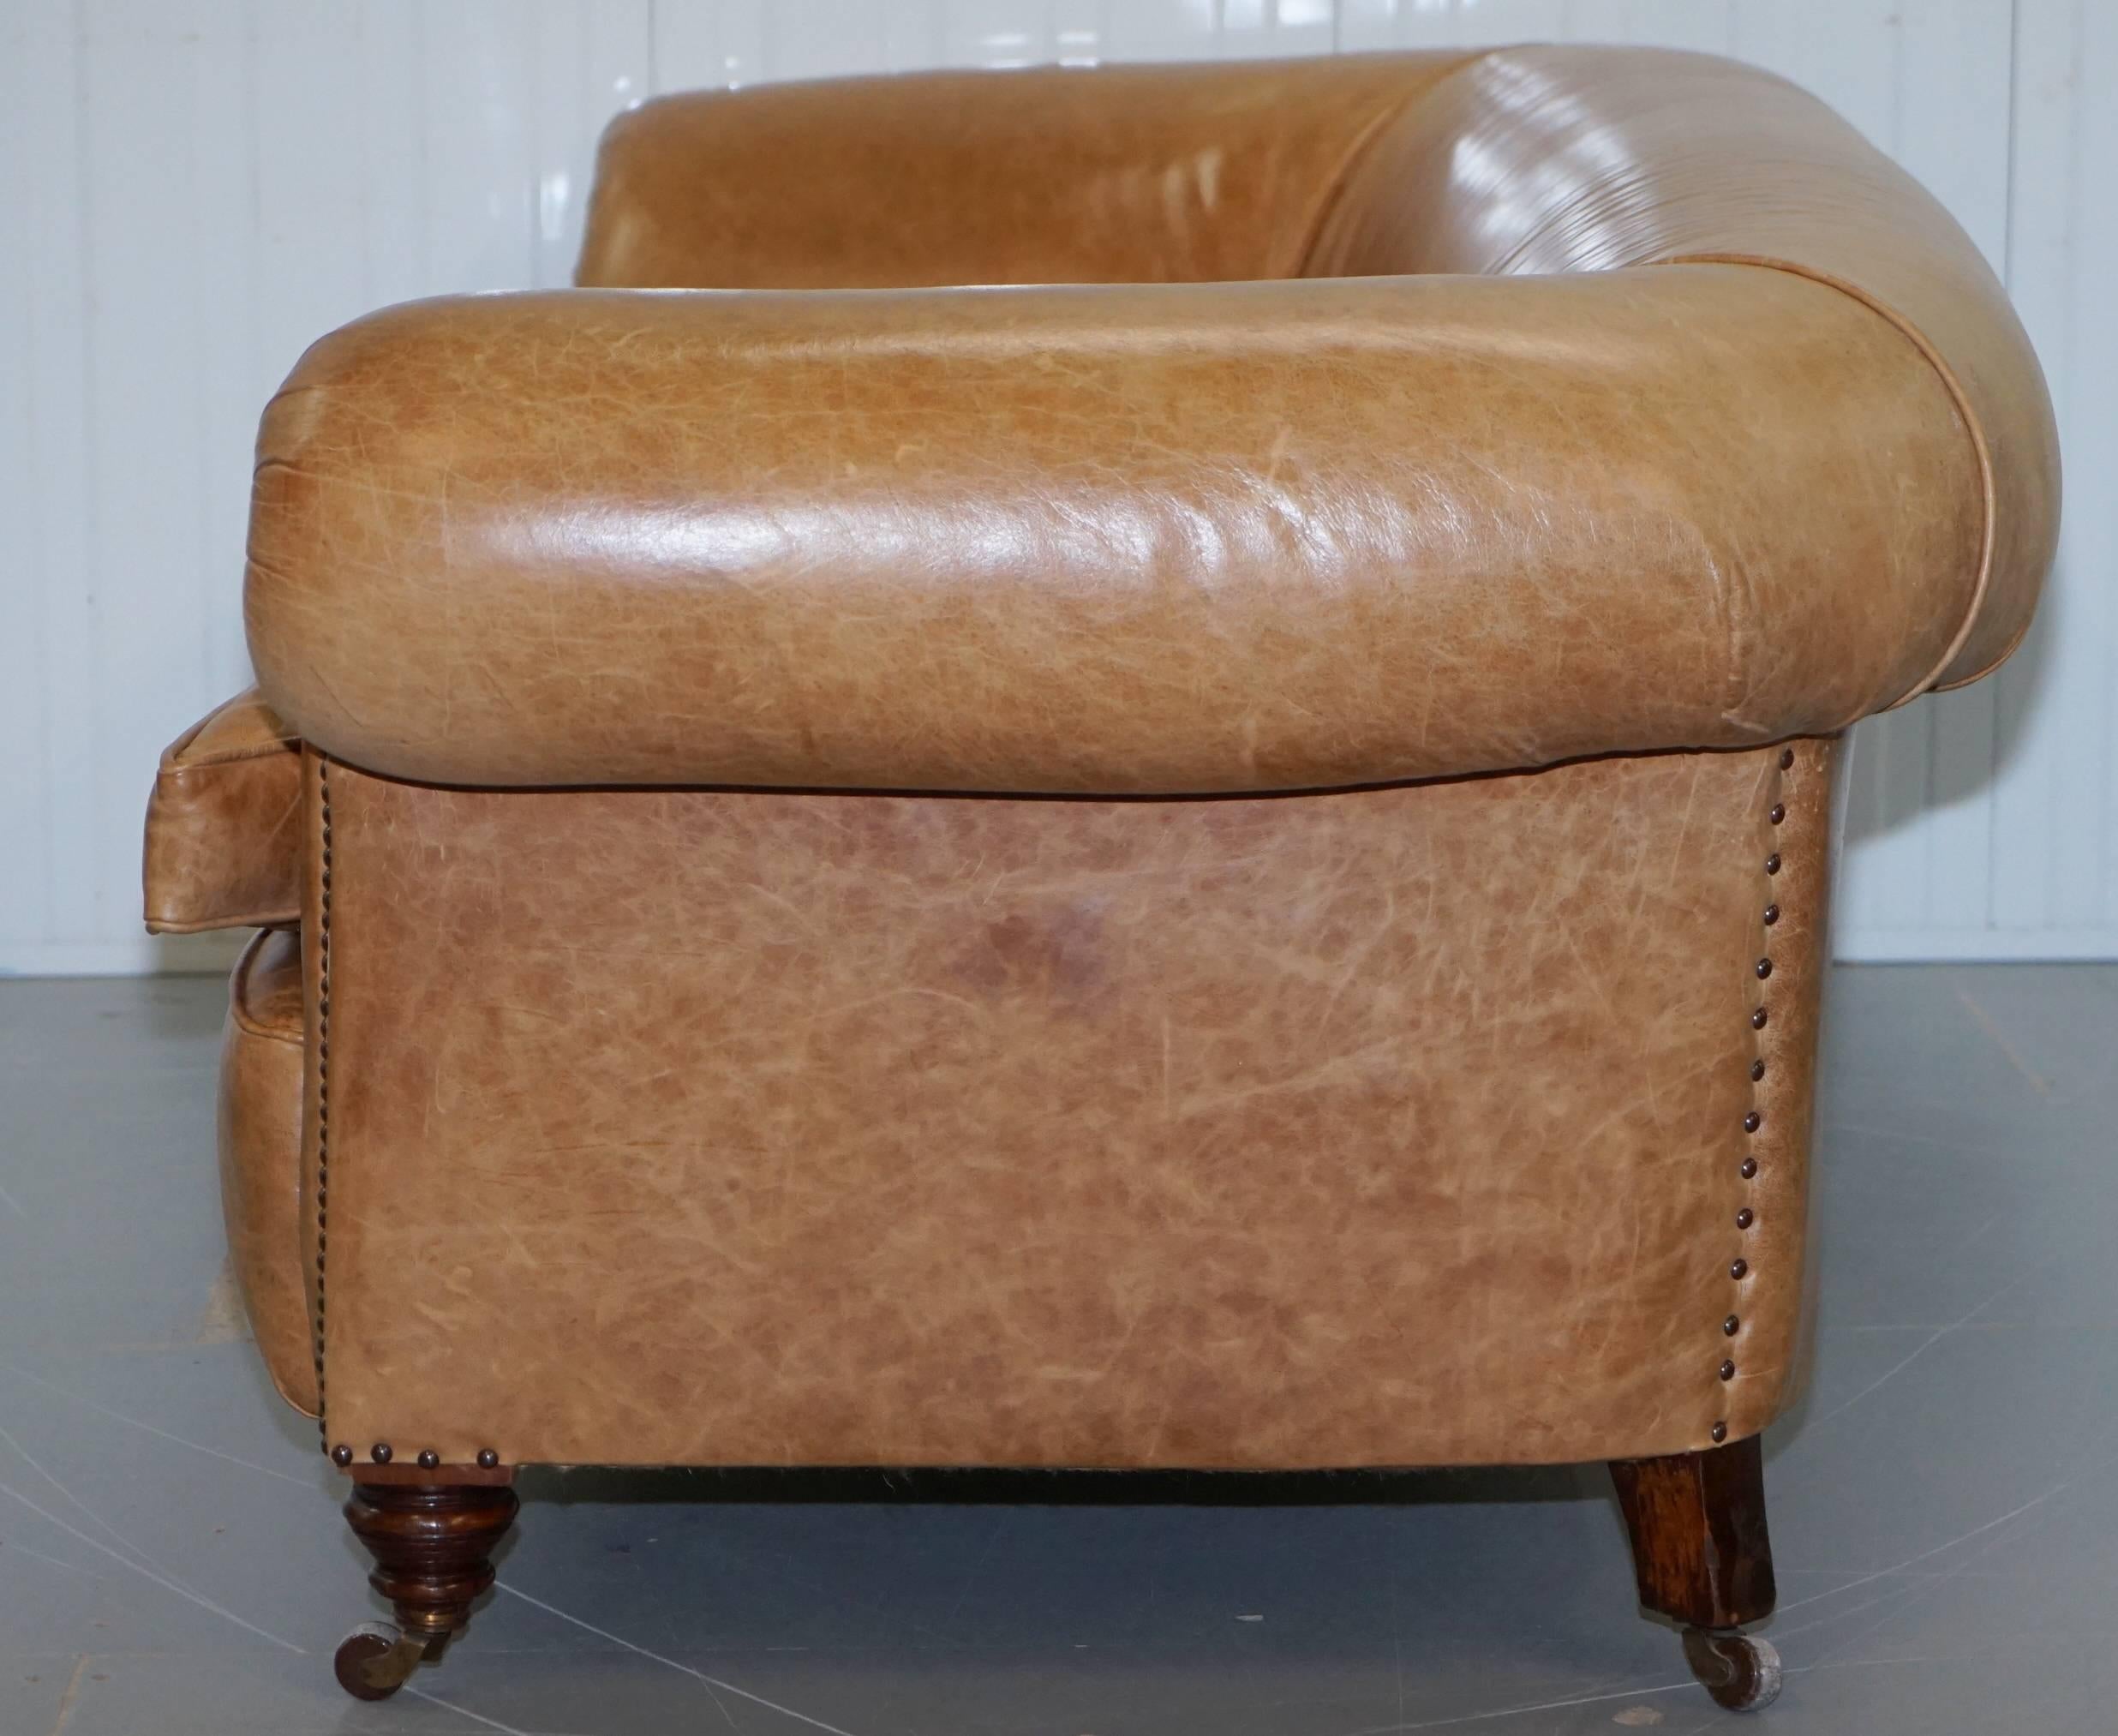 1 of 2 Victorian Brown Leather Sofas Stamped Back Leg Coil Sprung Feather Filled 7